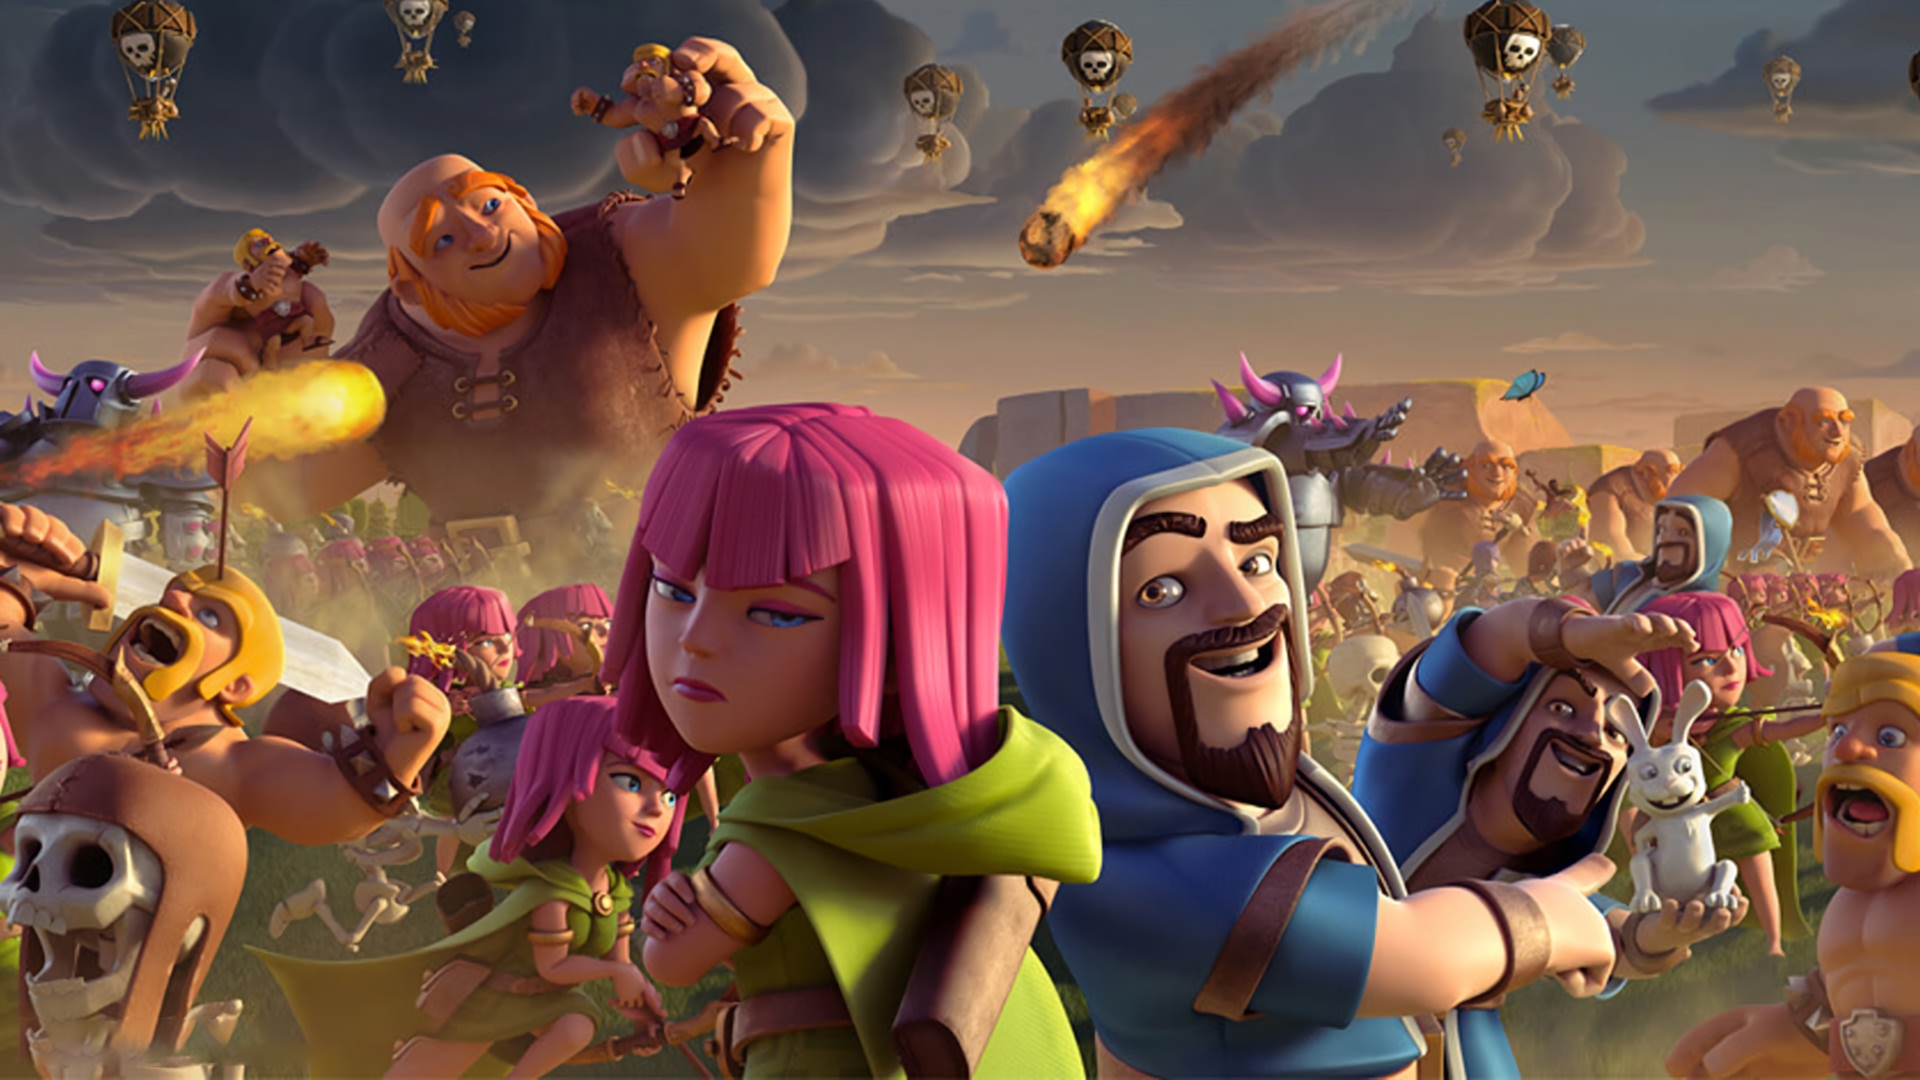 clash of clans hd iphone wallpapers Wallpapers